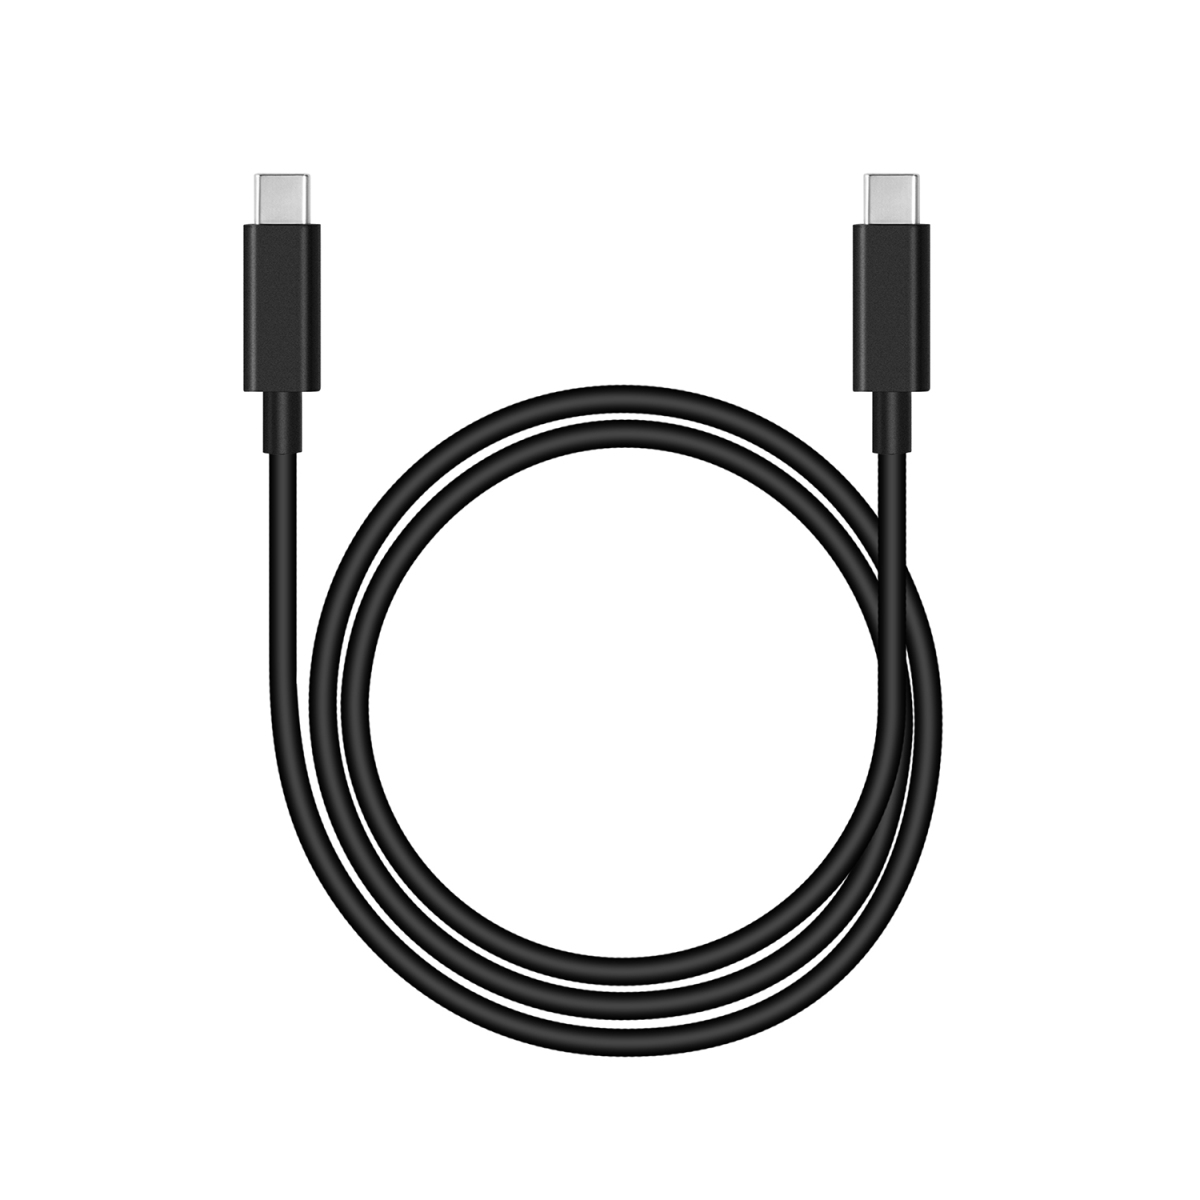 https://prd-huion.oss-accelerate.aliyuncs.com/a/905/usb-c-to-usb-c-cable.jpg?x-oss-process=image/resize,m_lfit,w_1200